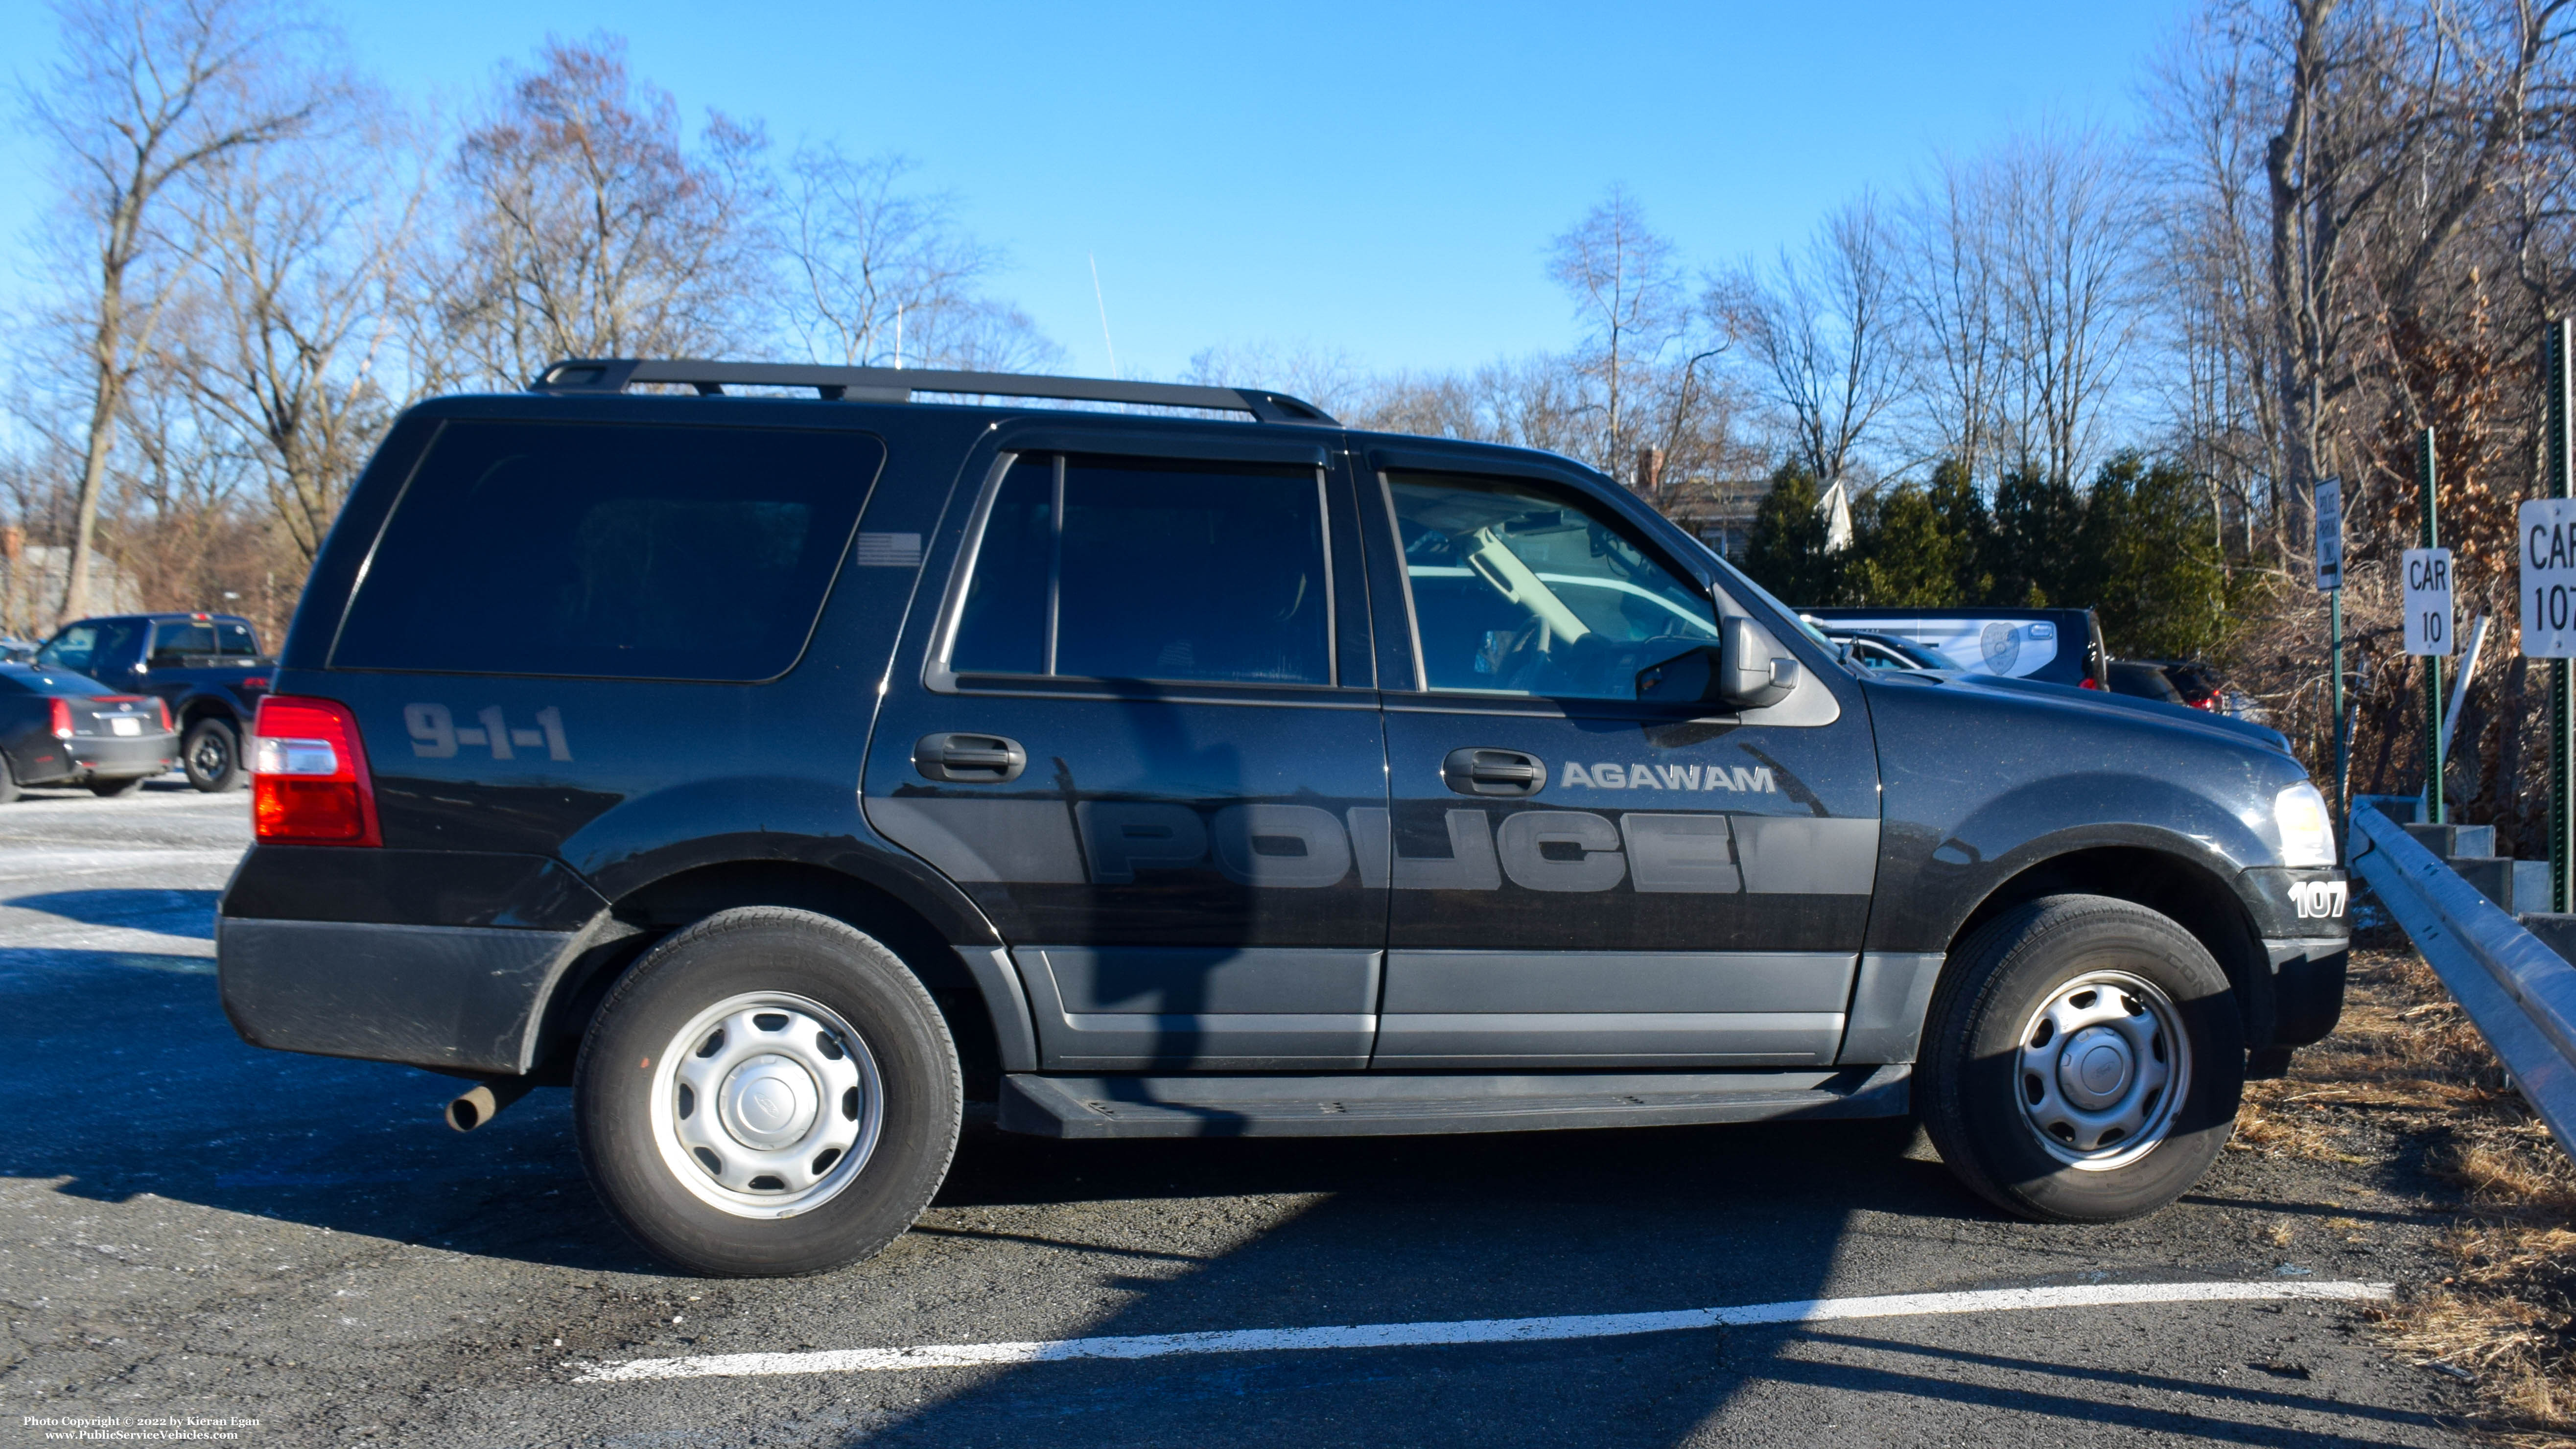 A photo  of Agawam Police
            Cruiser 107, a 2007-2019 Ford Expedition             taken by Kieran Egan